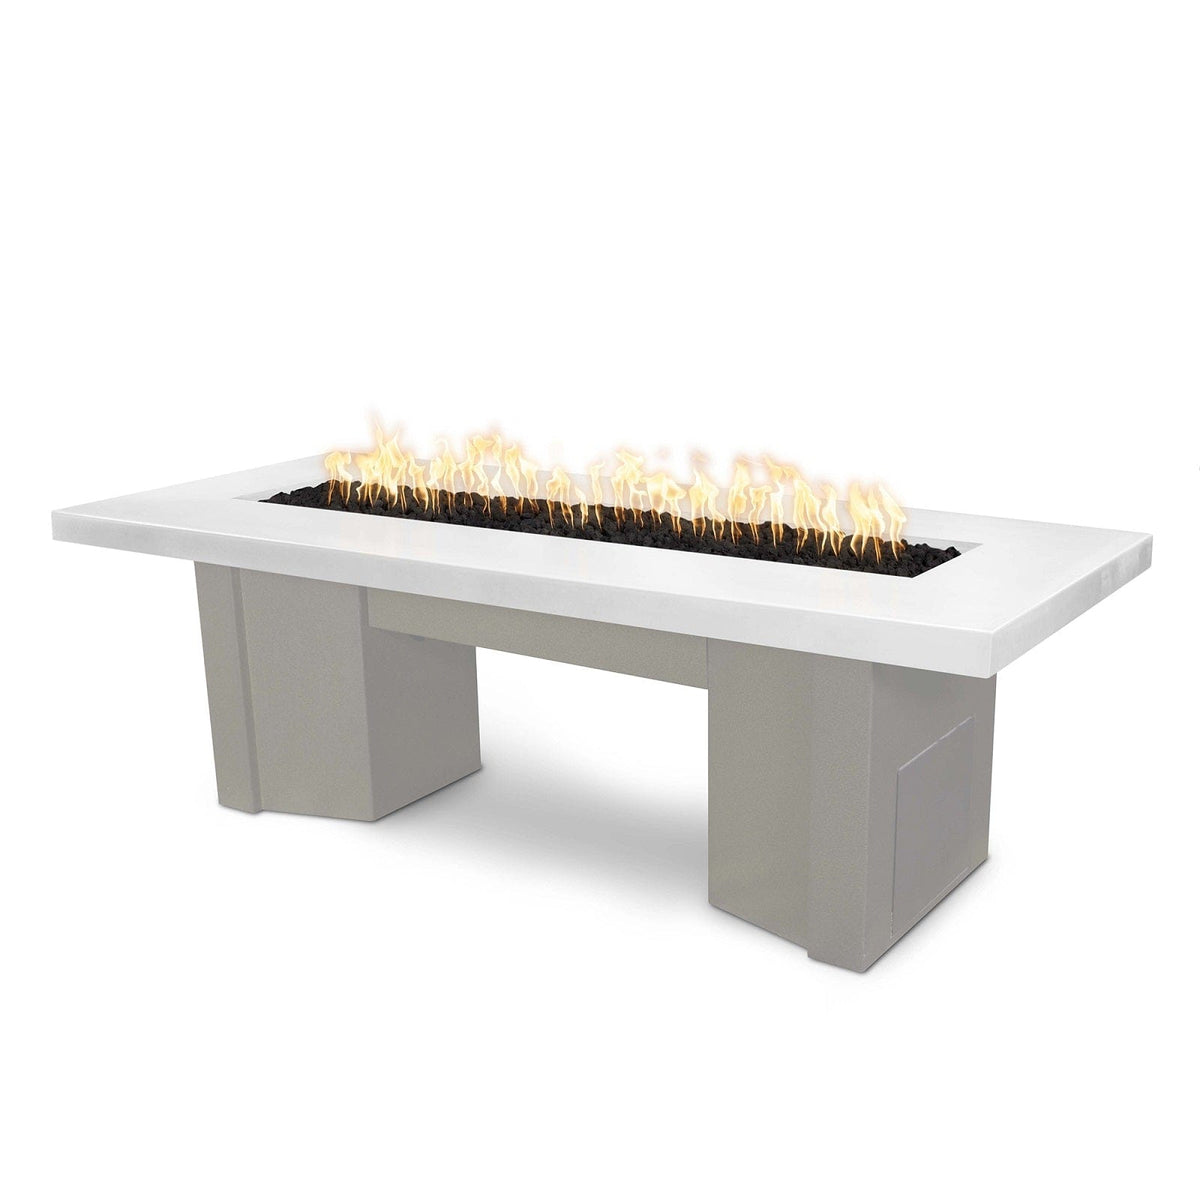 The Outdoor Plus Fire Features Limestone (-LIM) / Pewter Powder Coated Steel (-PEW) The Outdoor Plus 60&quot; Alameda Fire Table Smooth Concrete in Liquid Propane - Flame Sense System with Push Button Spark Igniter / OPT-ALMGFRC60FSEN-LP